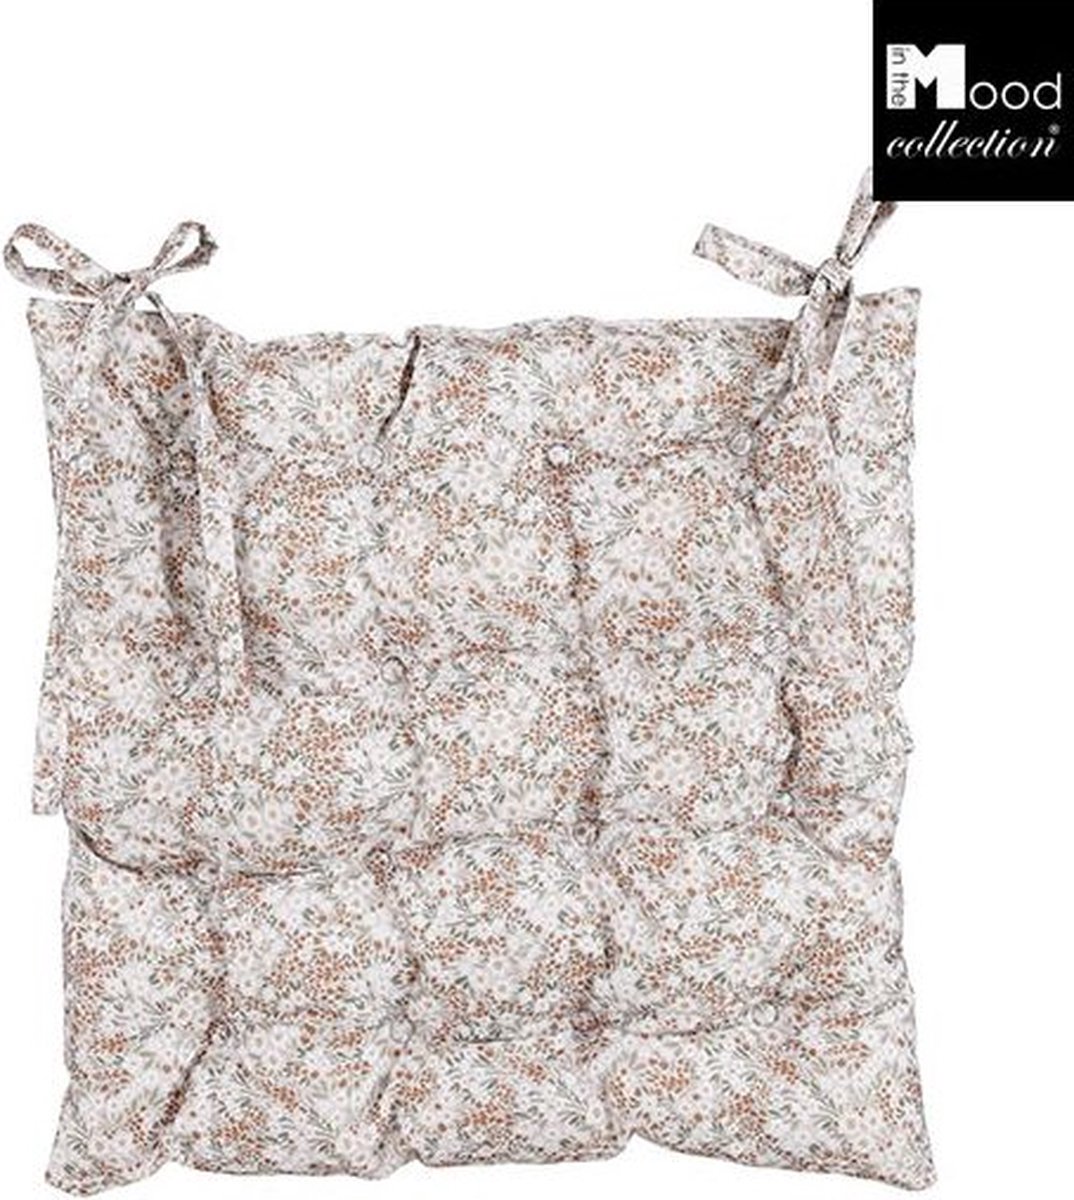 In The Mood Blossom Stoelkussen 45 x 45 x 5 cm - Beige